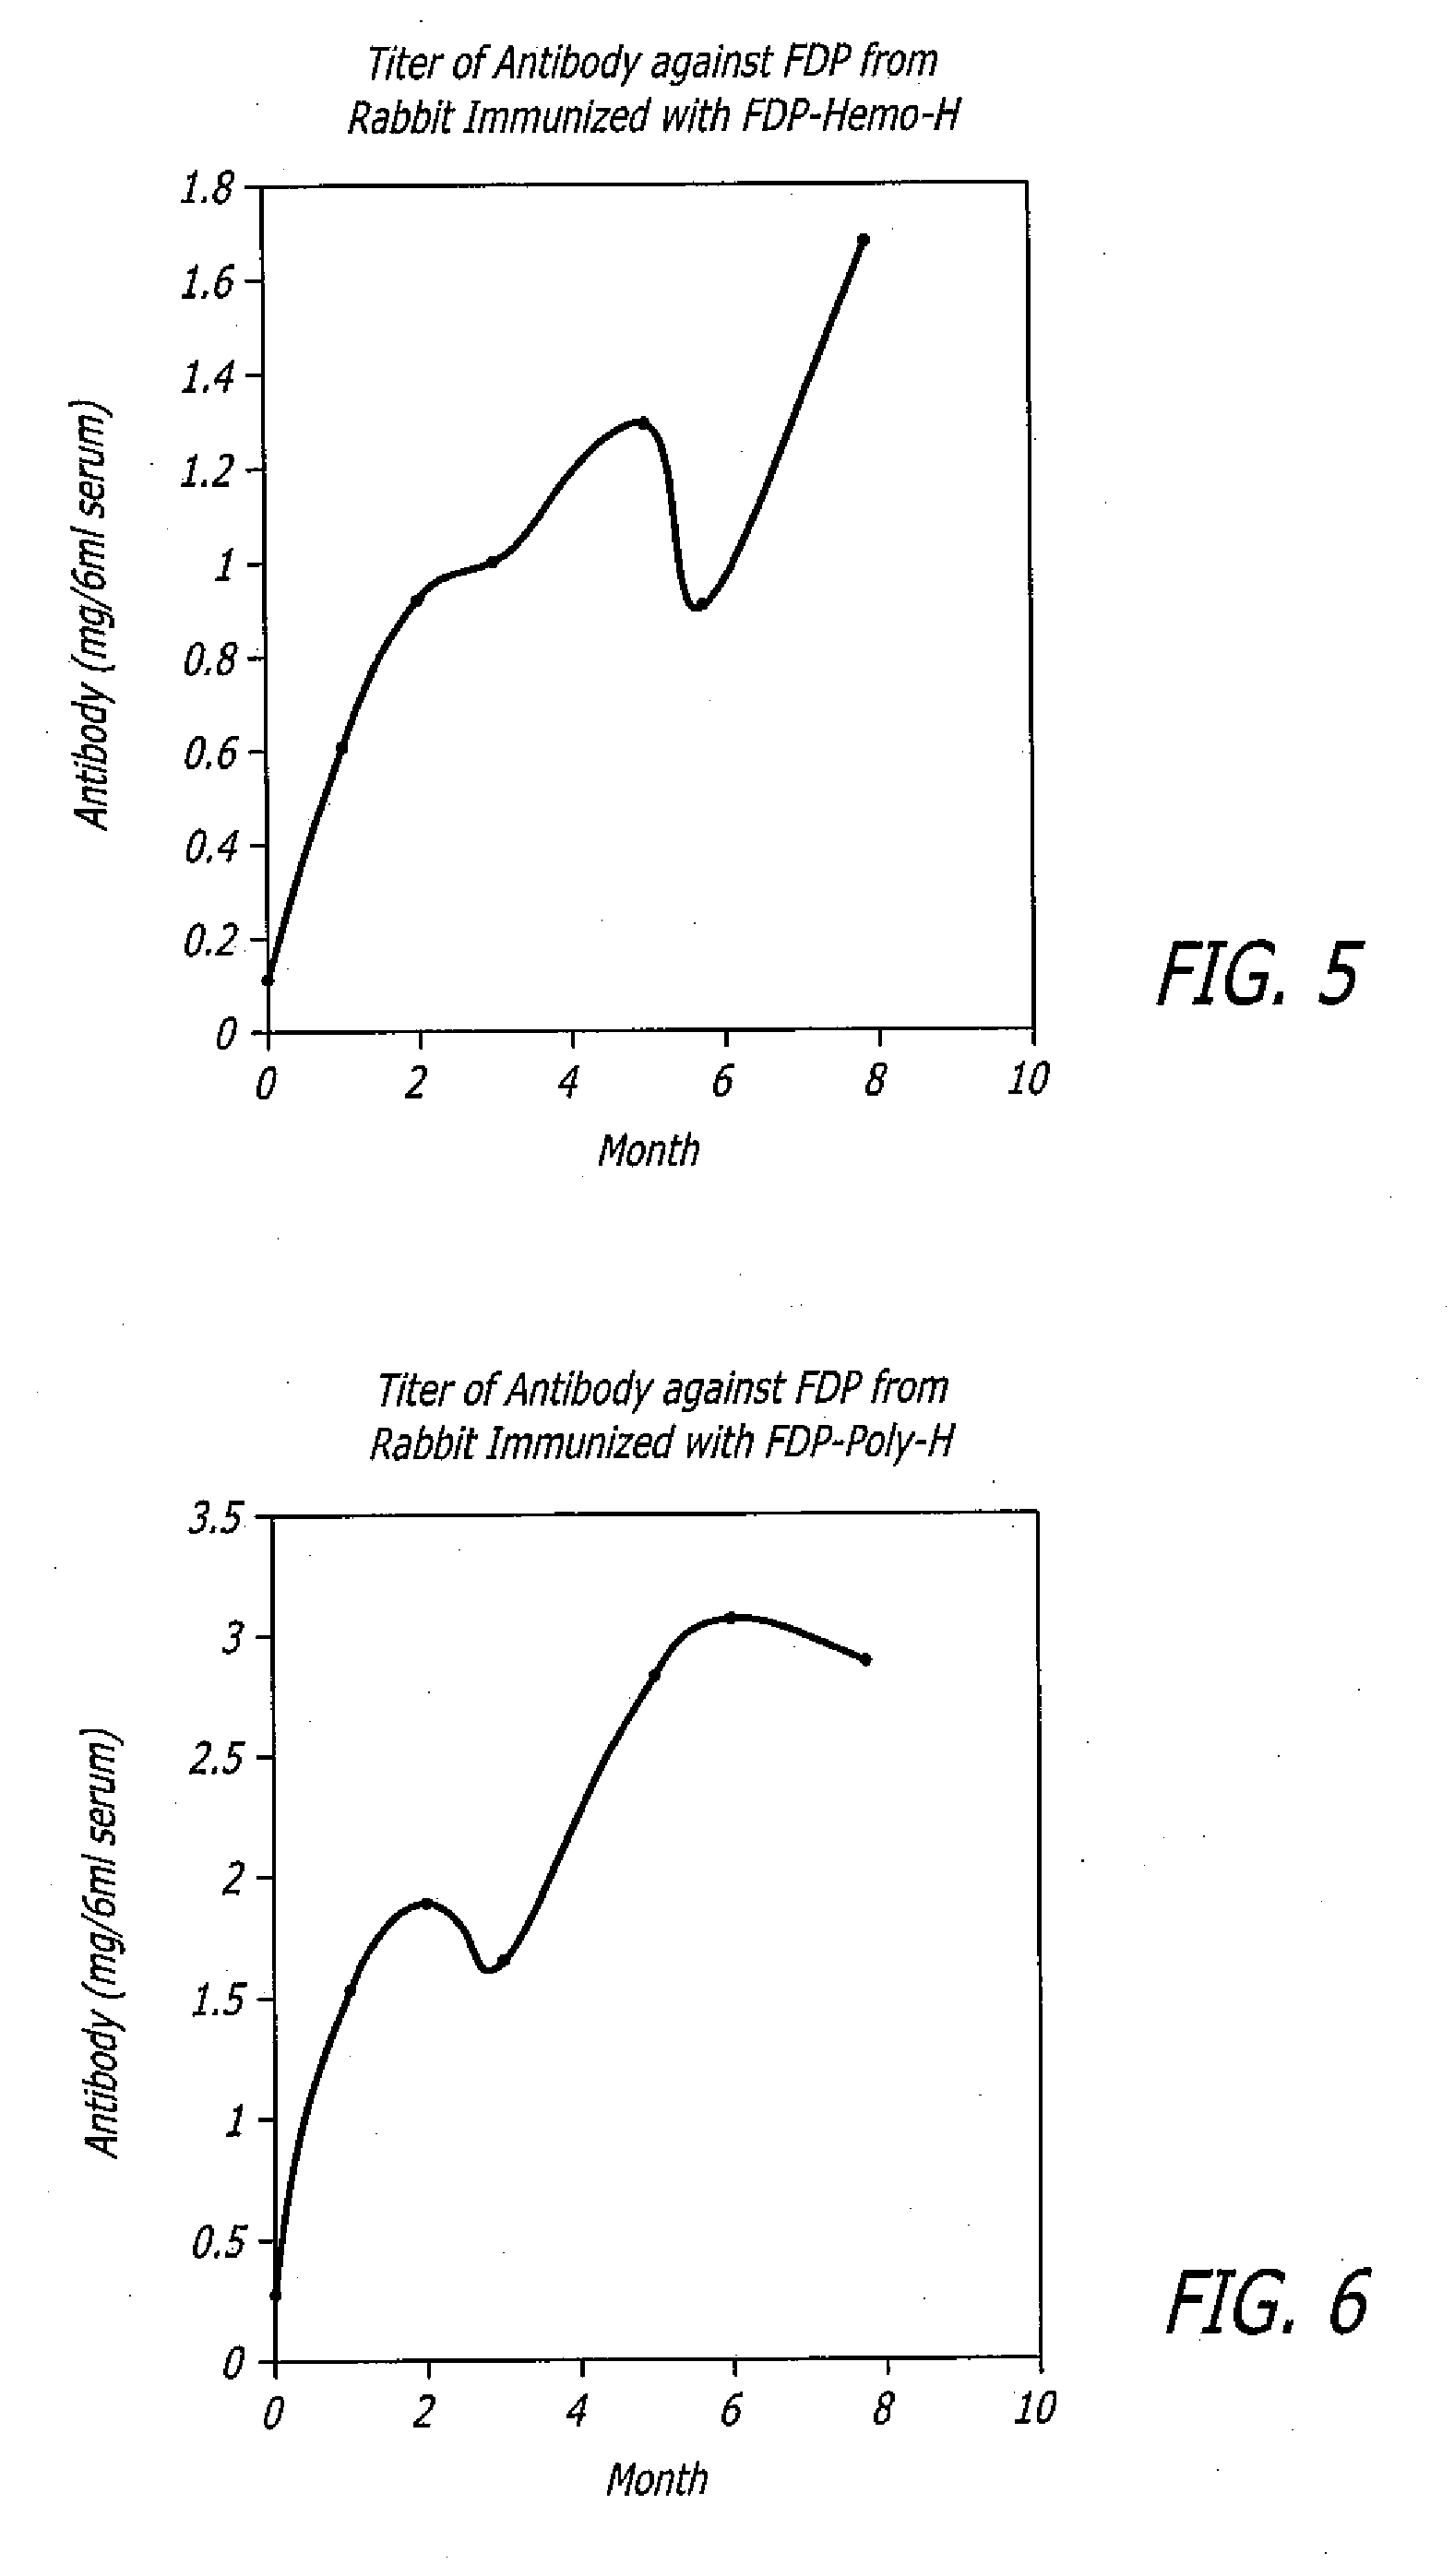 Polyclonal antibodies against fibrinogen degradation products and associated methods of production and use